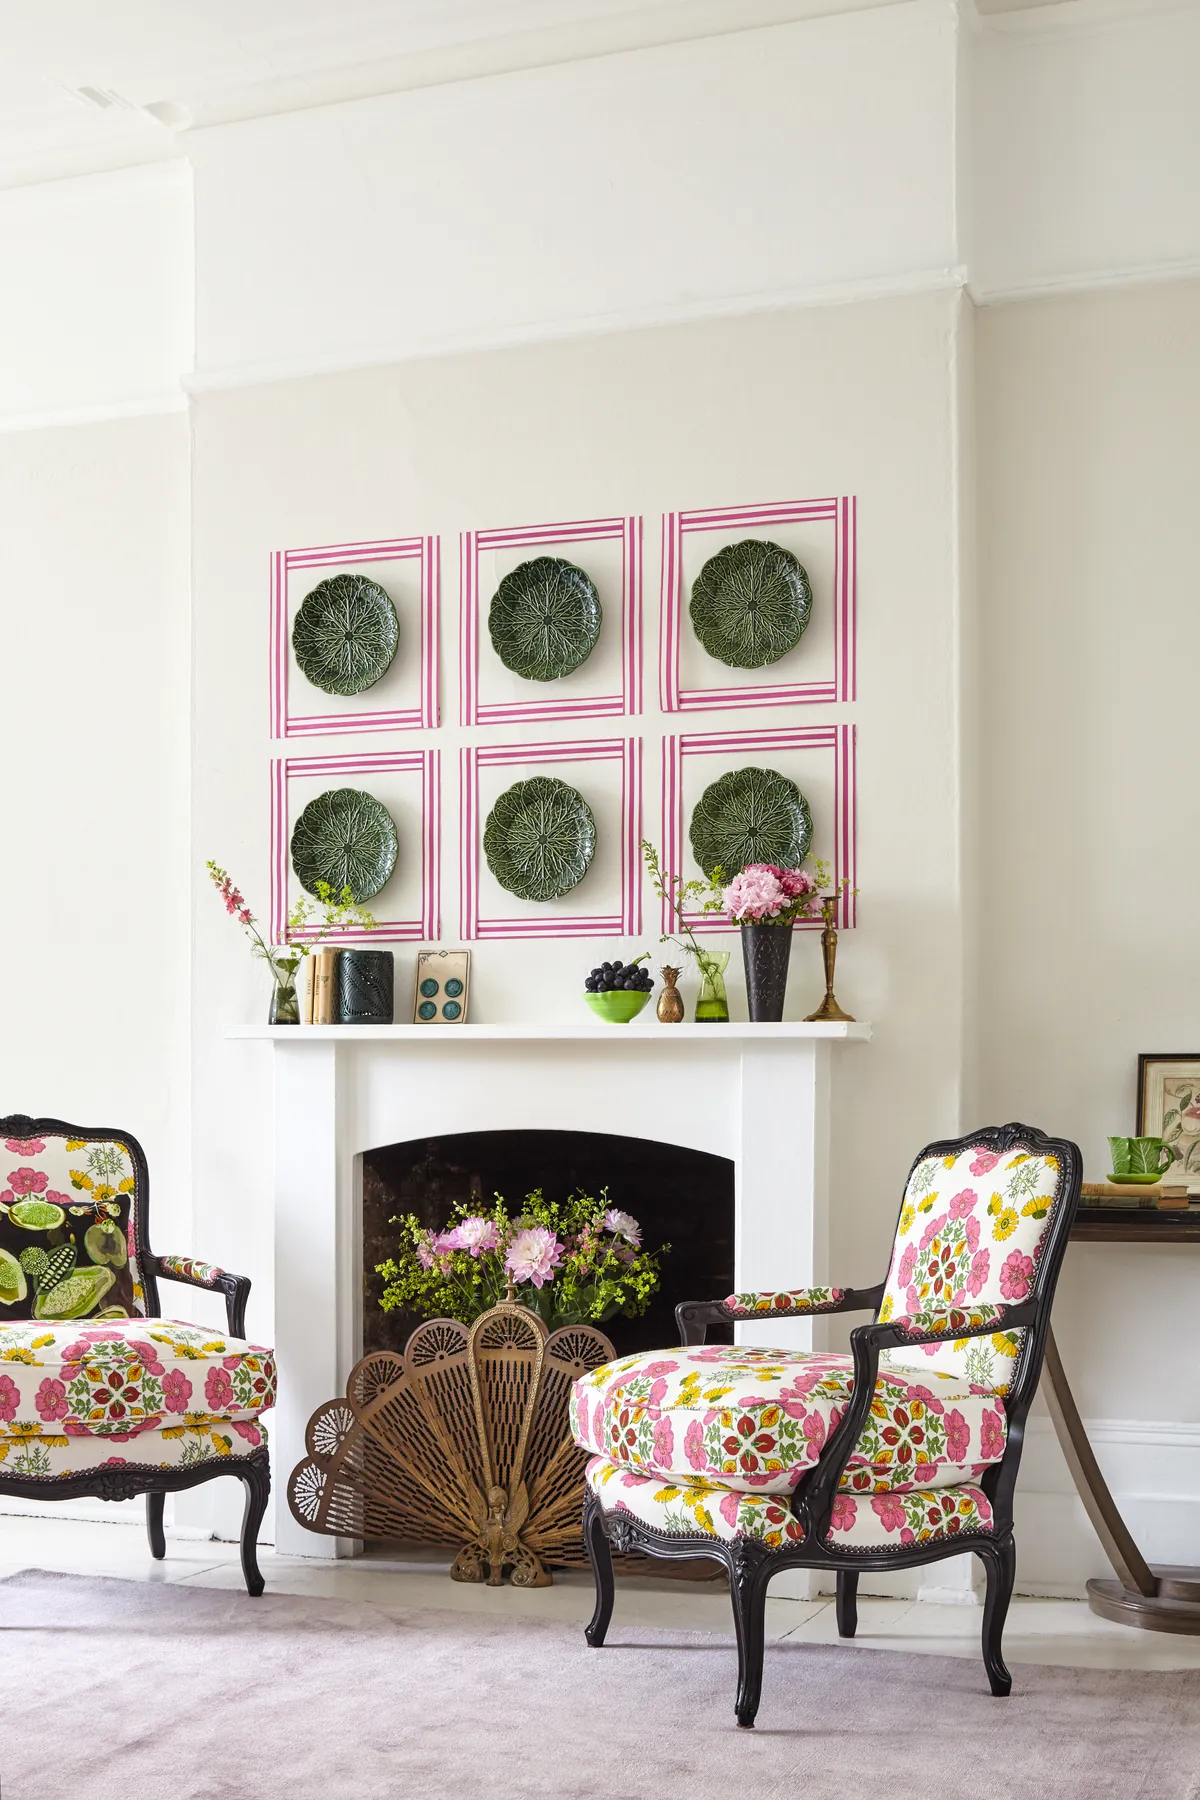 Create a focal point on a wall by hanging antique cabbageware plates and framing with neon washi tape